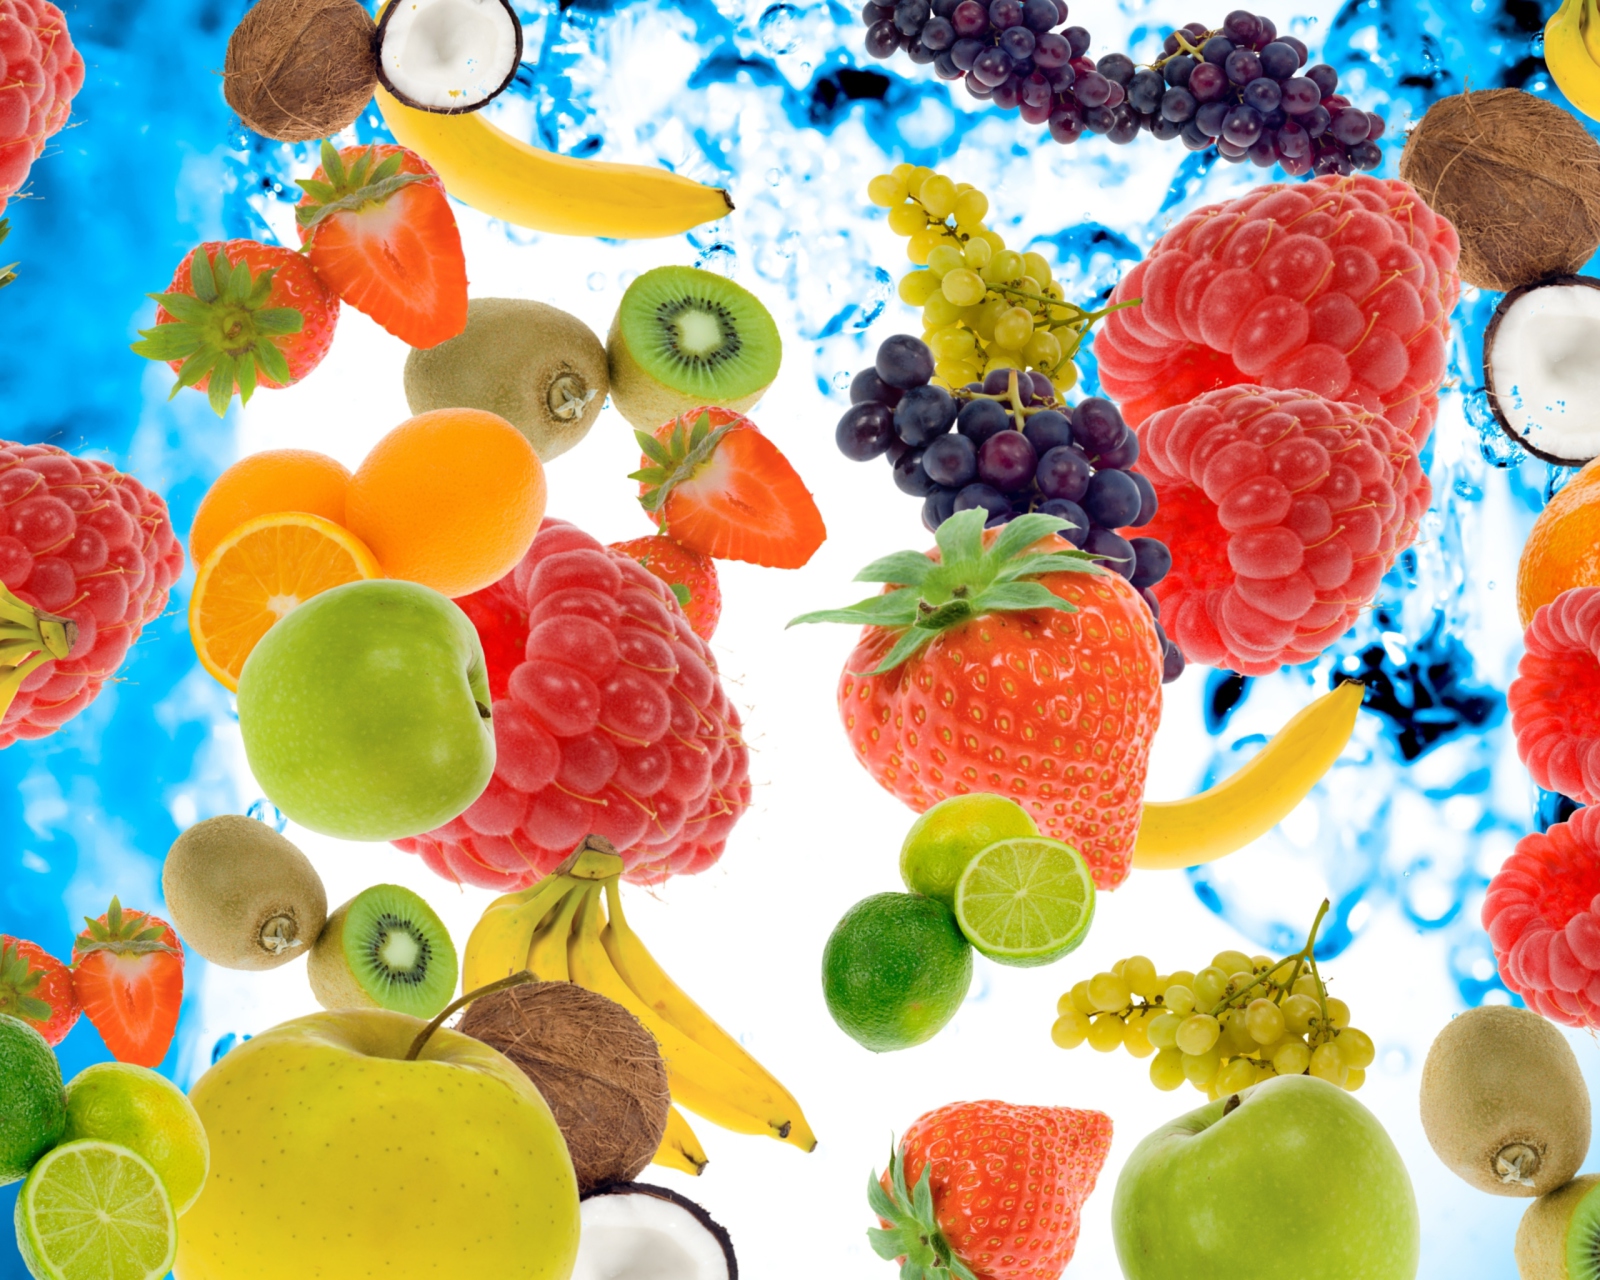 Berries And Fruits wallpaper 1600x1280